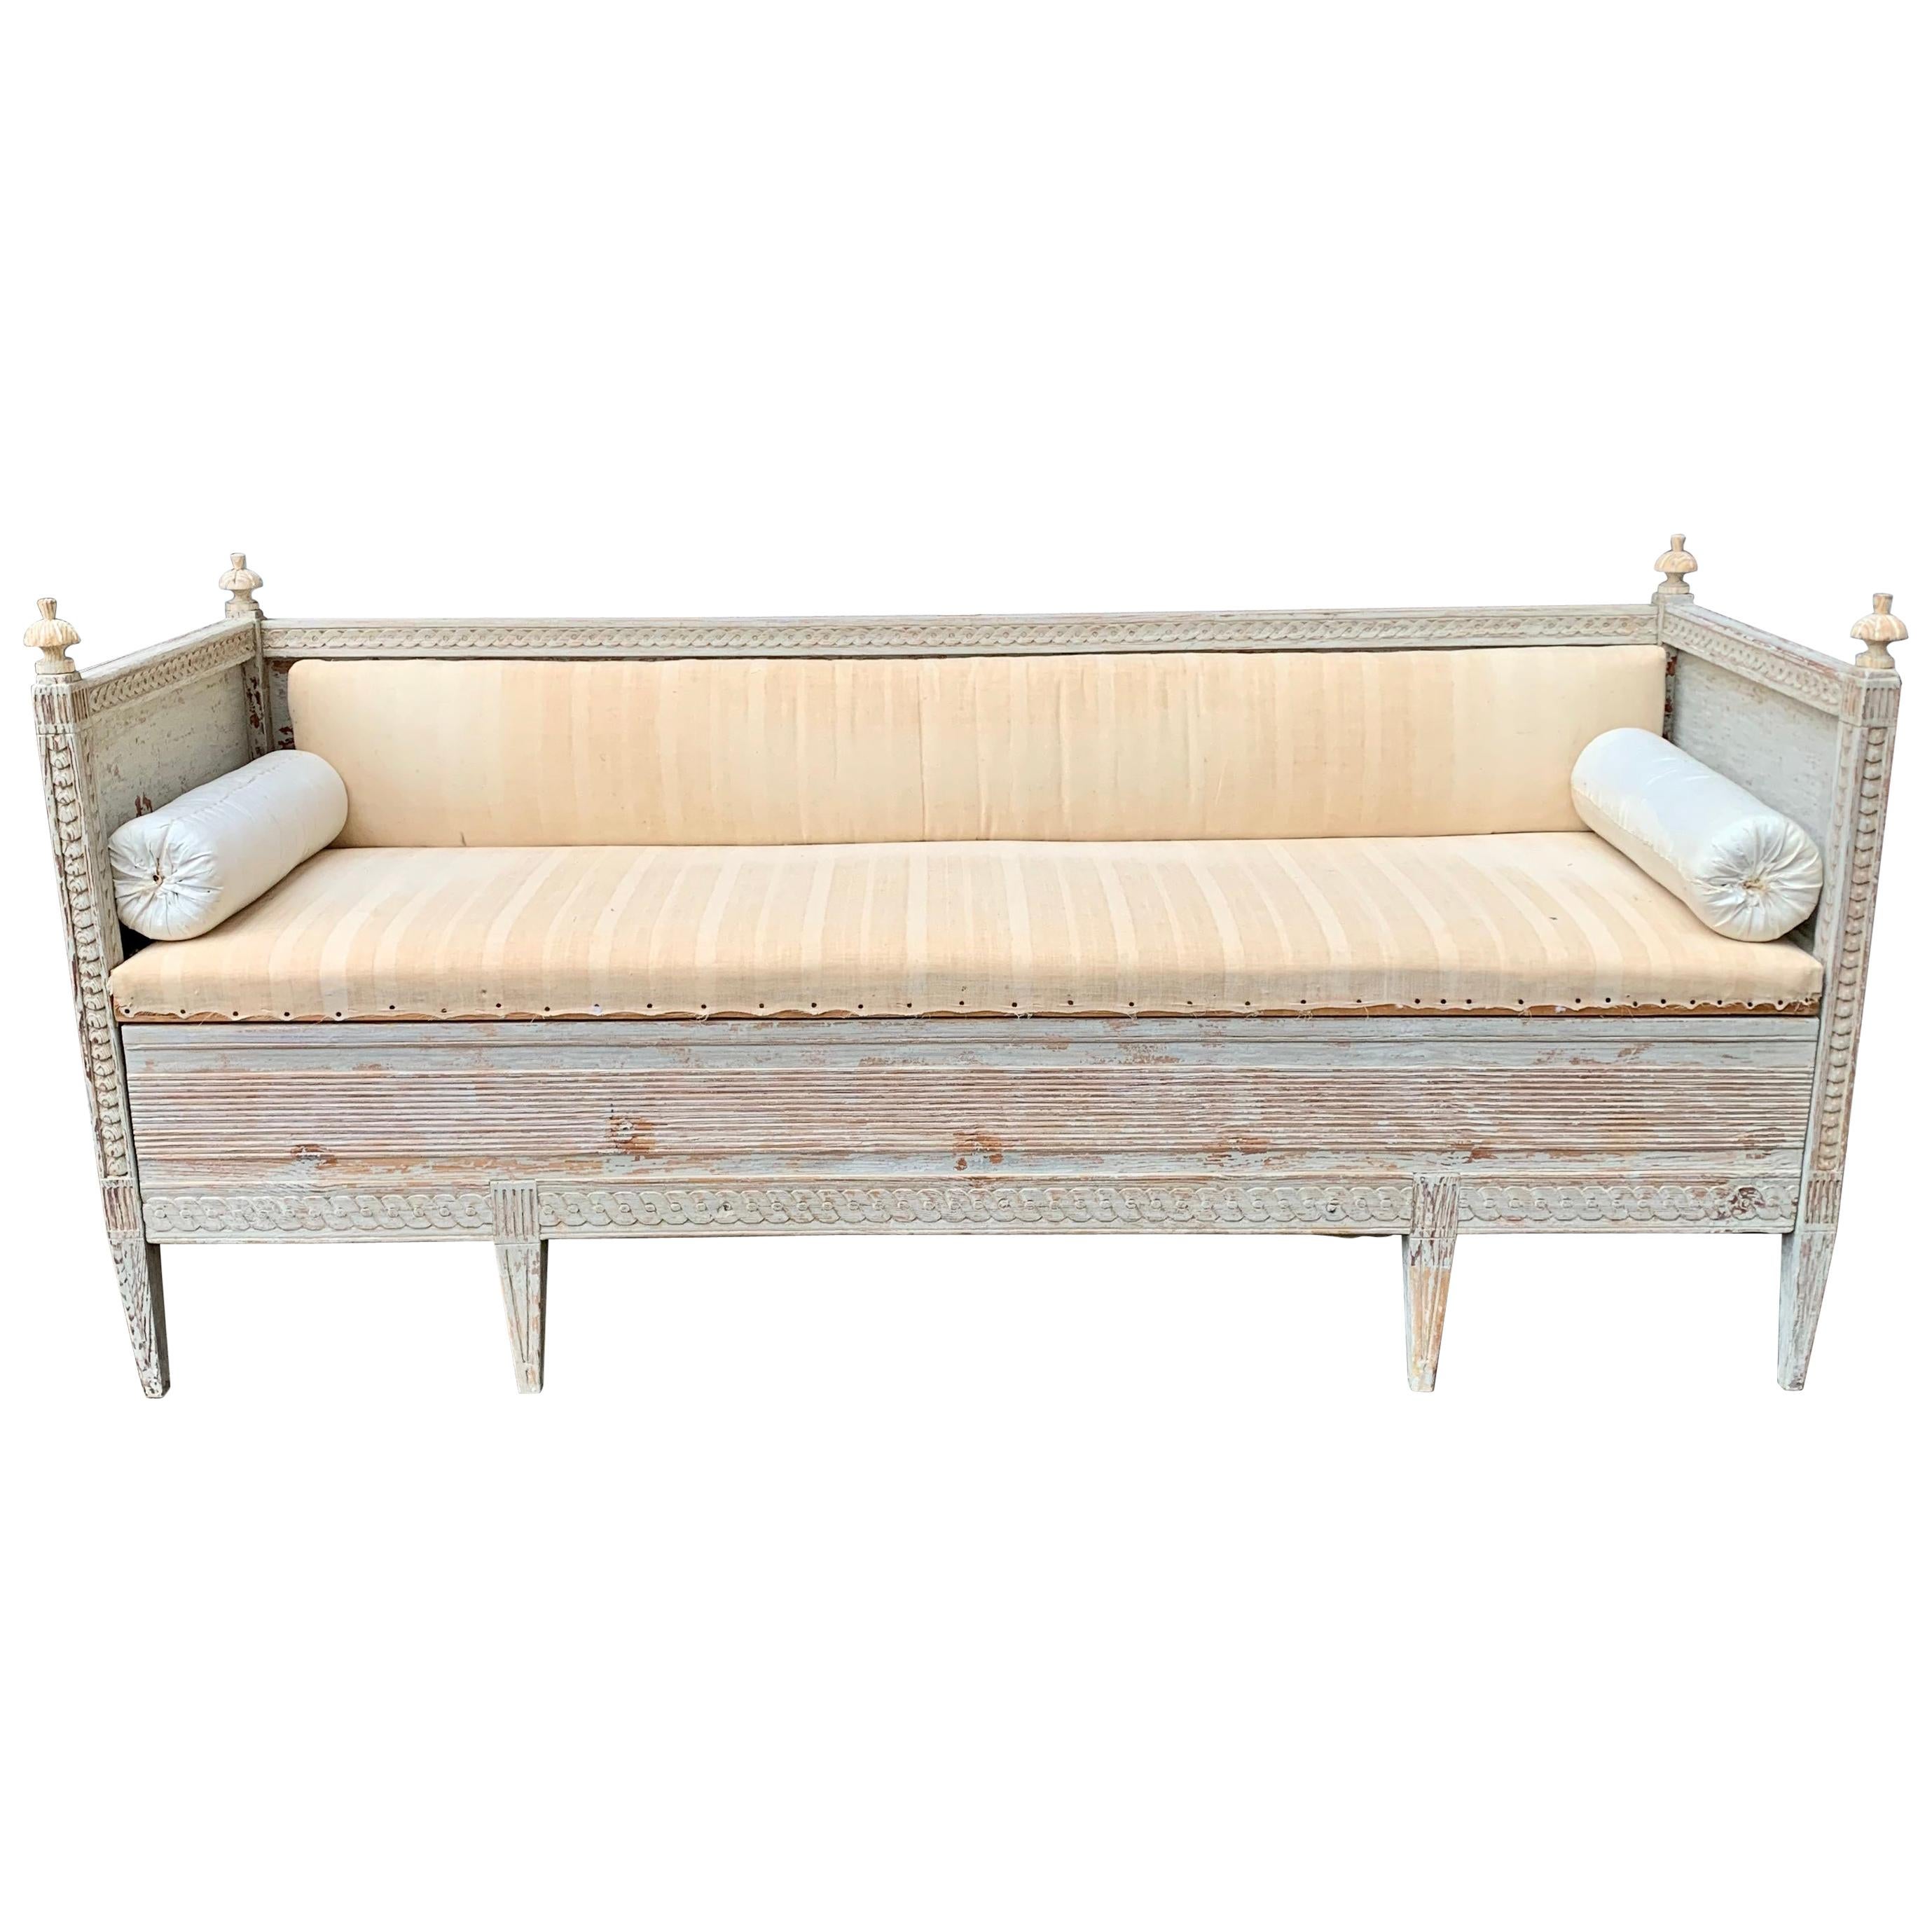 Painted Swedish 18th Century Gustavian Sofa Bench Daybed In Old Gray Paint